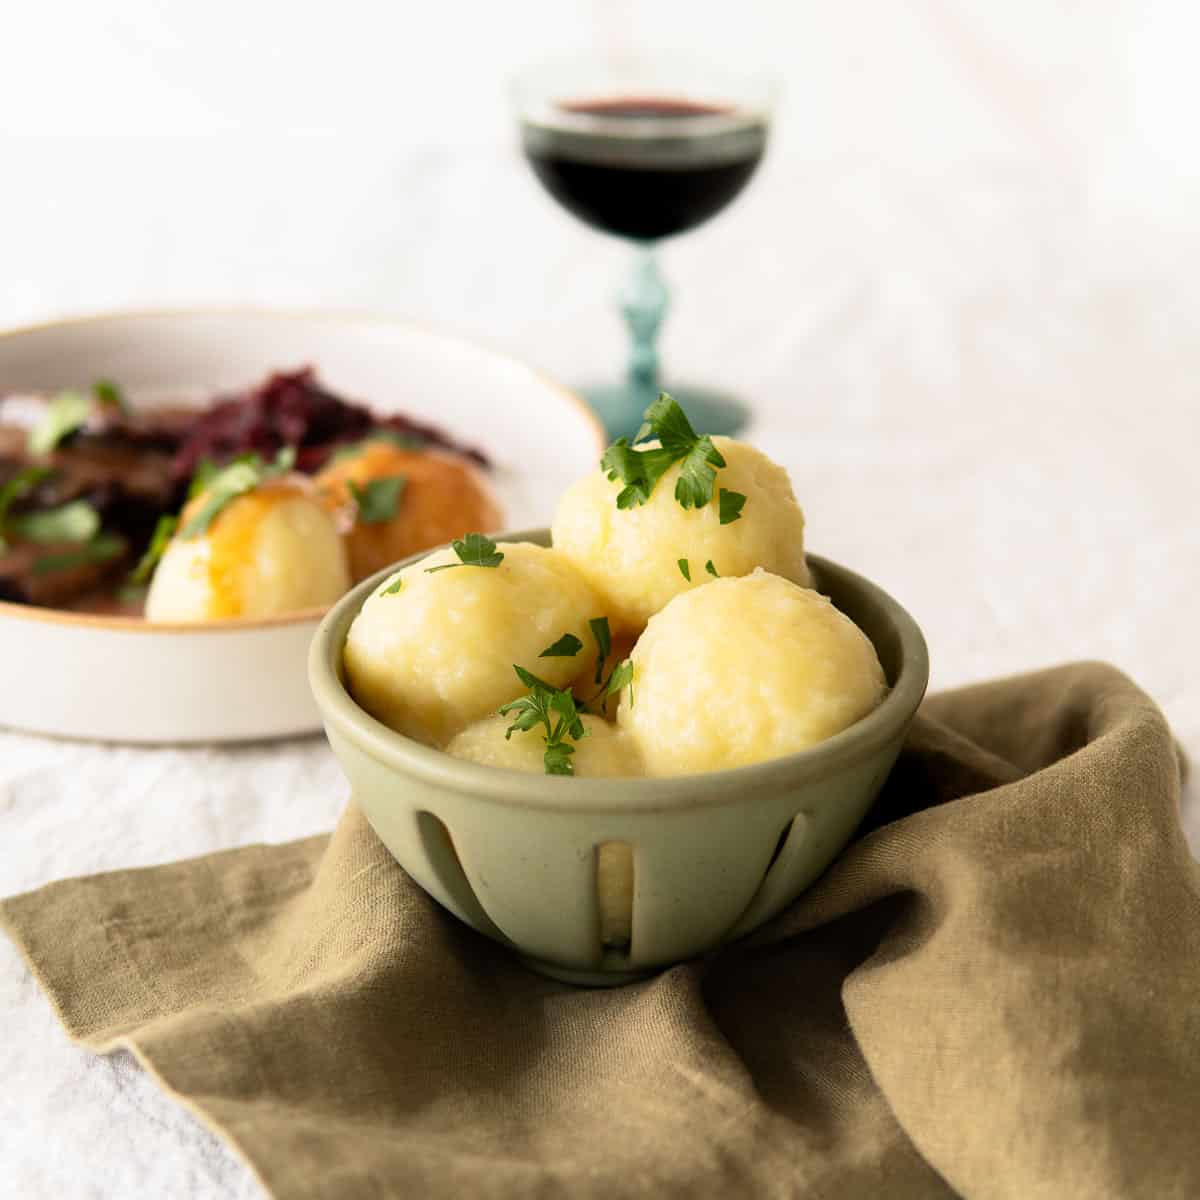 German potato dumplings in a bowl with parsley sprinkled over the top and in the background plated with a roast and red cabbage.